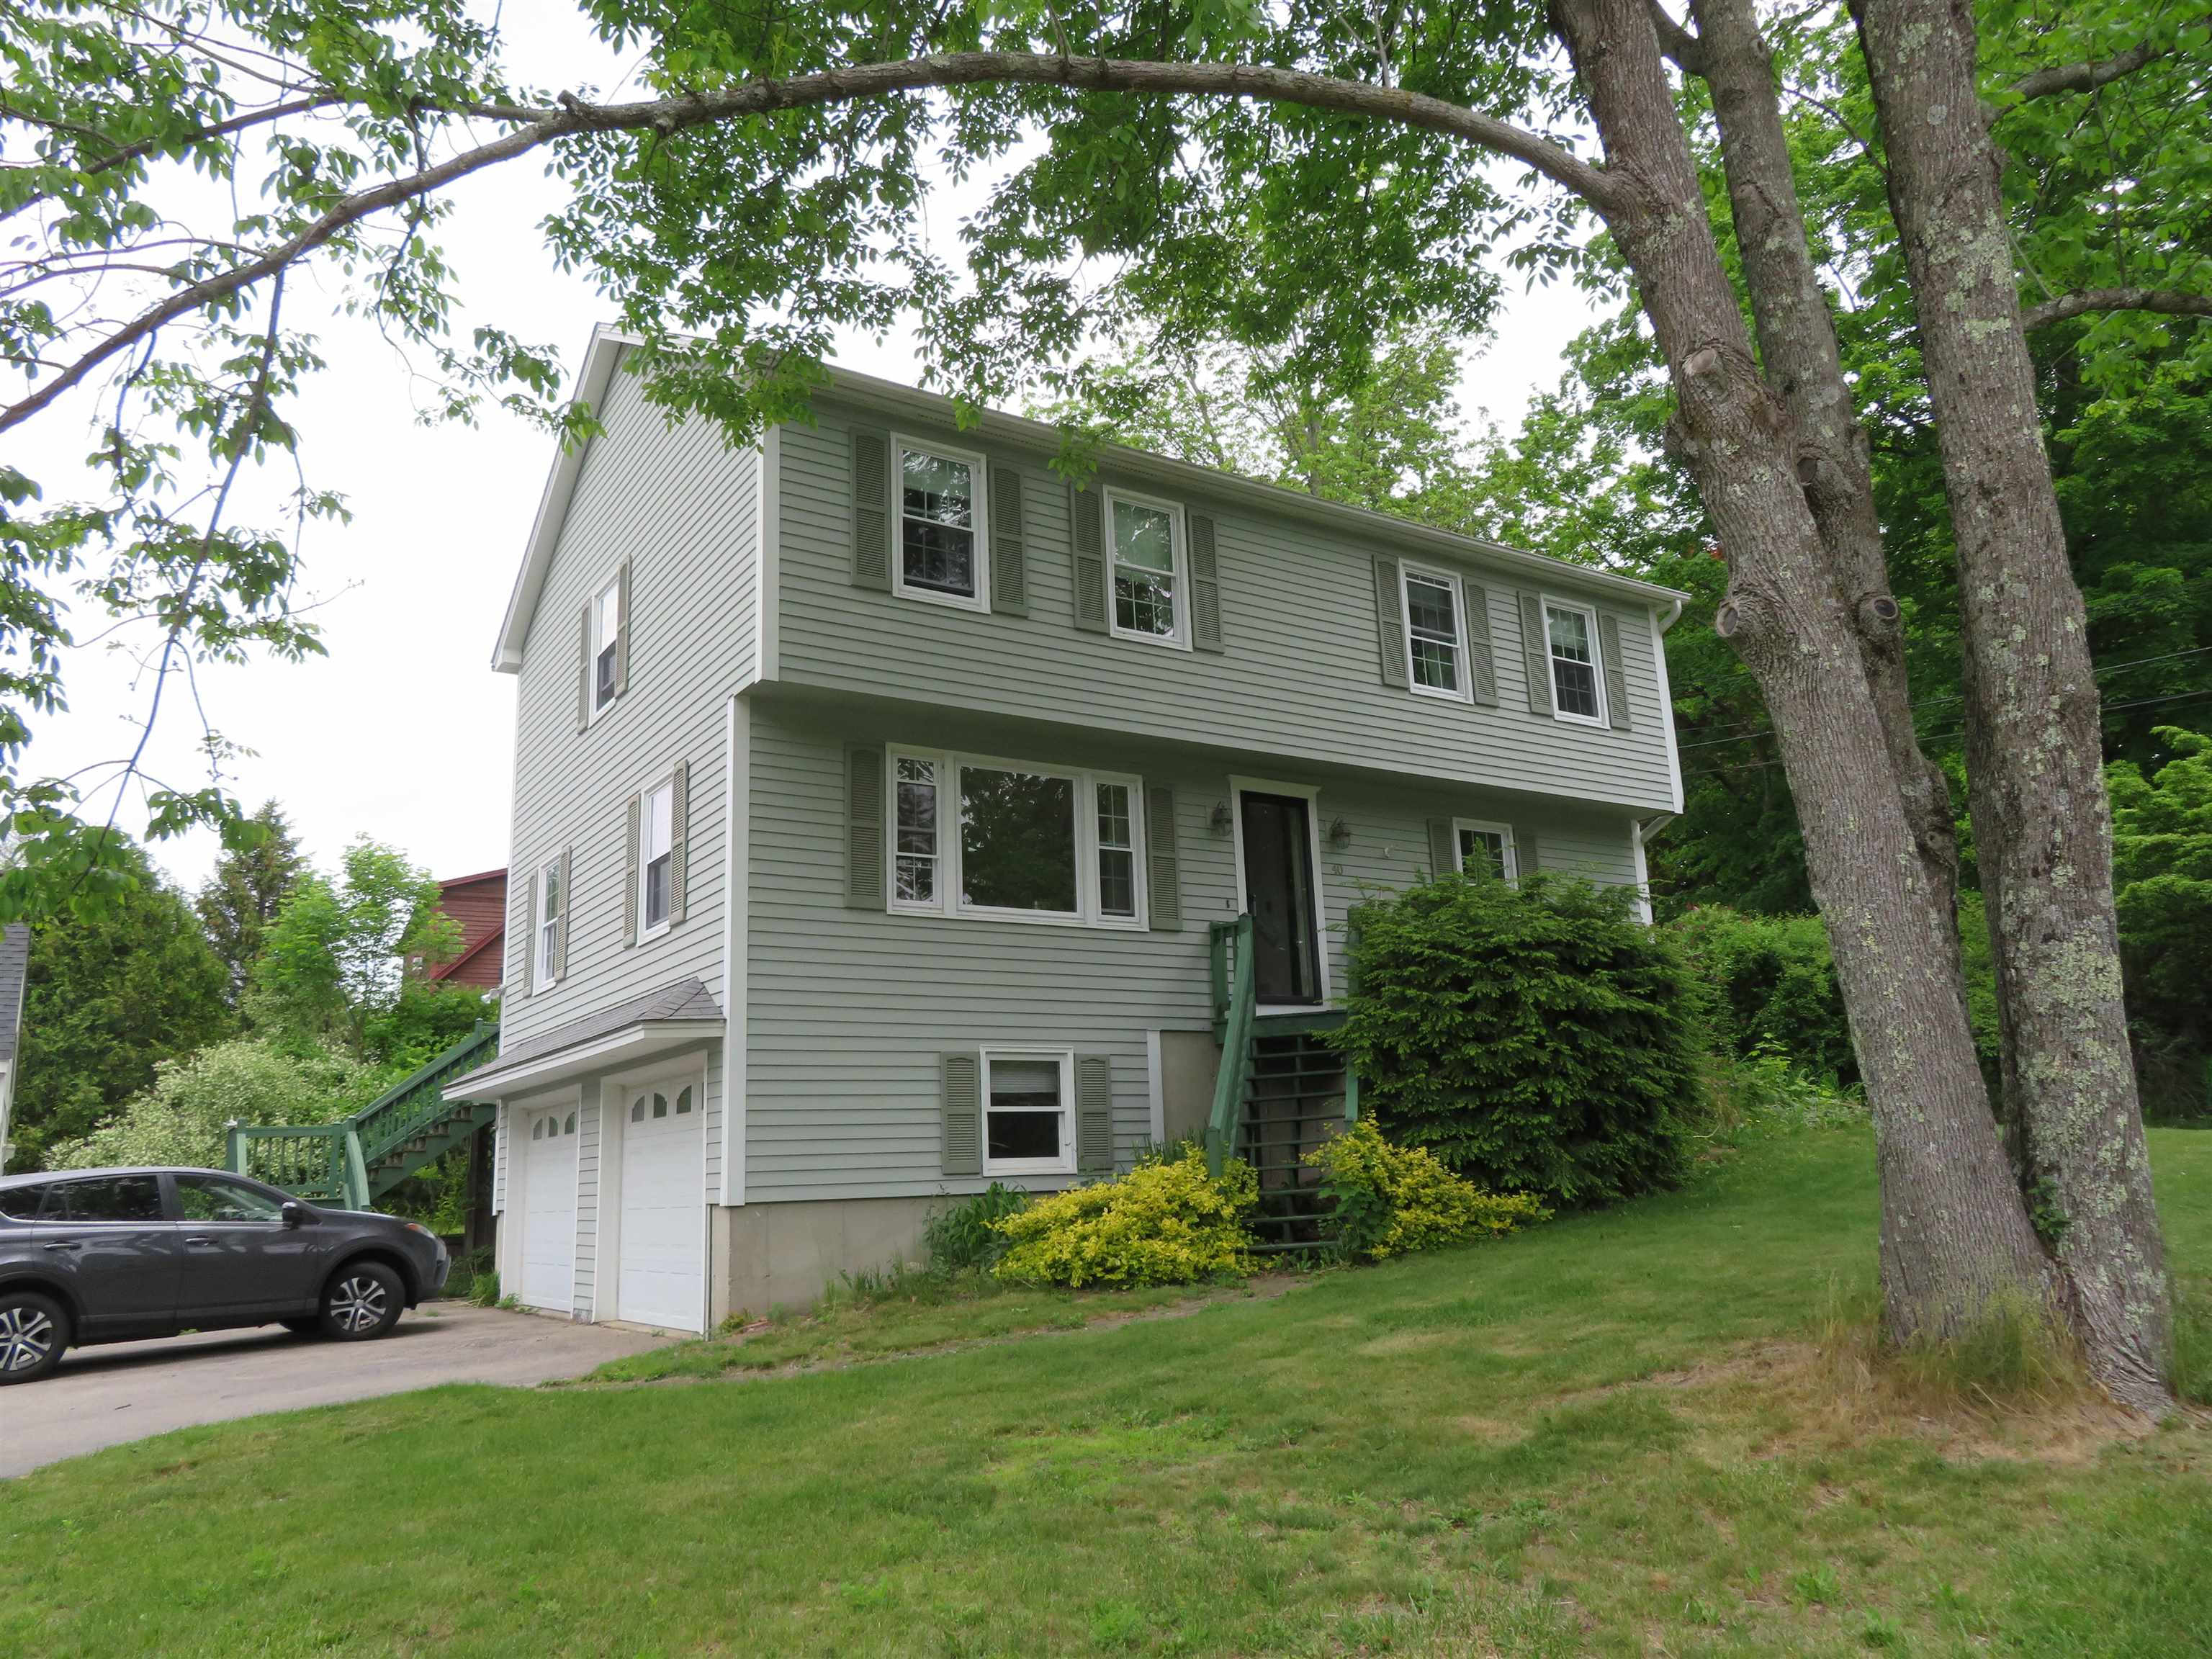 40 Cate Street Epping, NH Photo